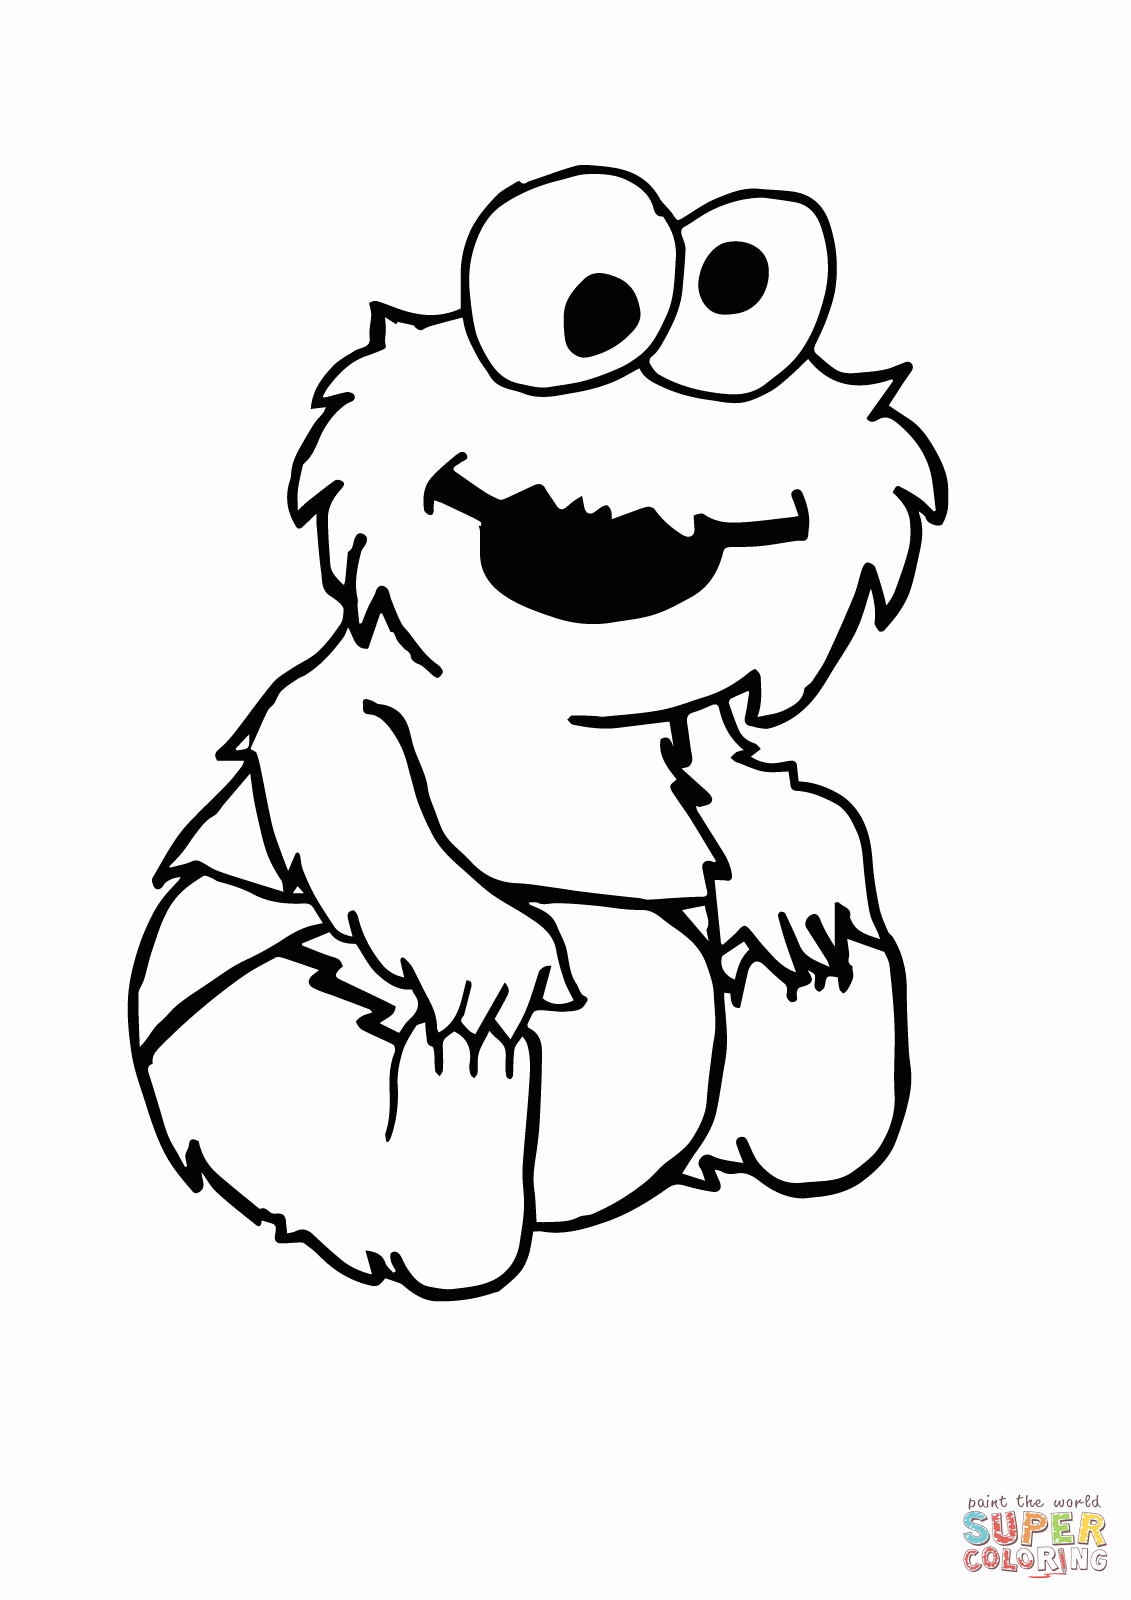 Free Printable Cookie Monster Coloring Page Nice | Coloring pages